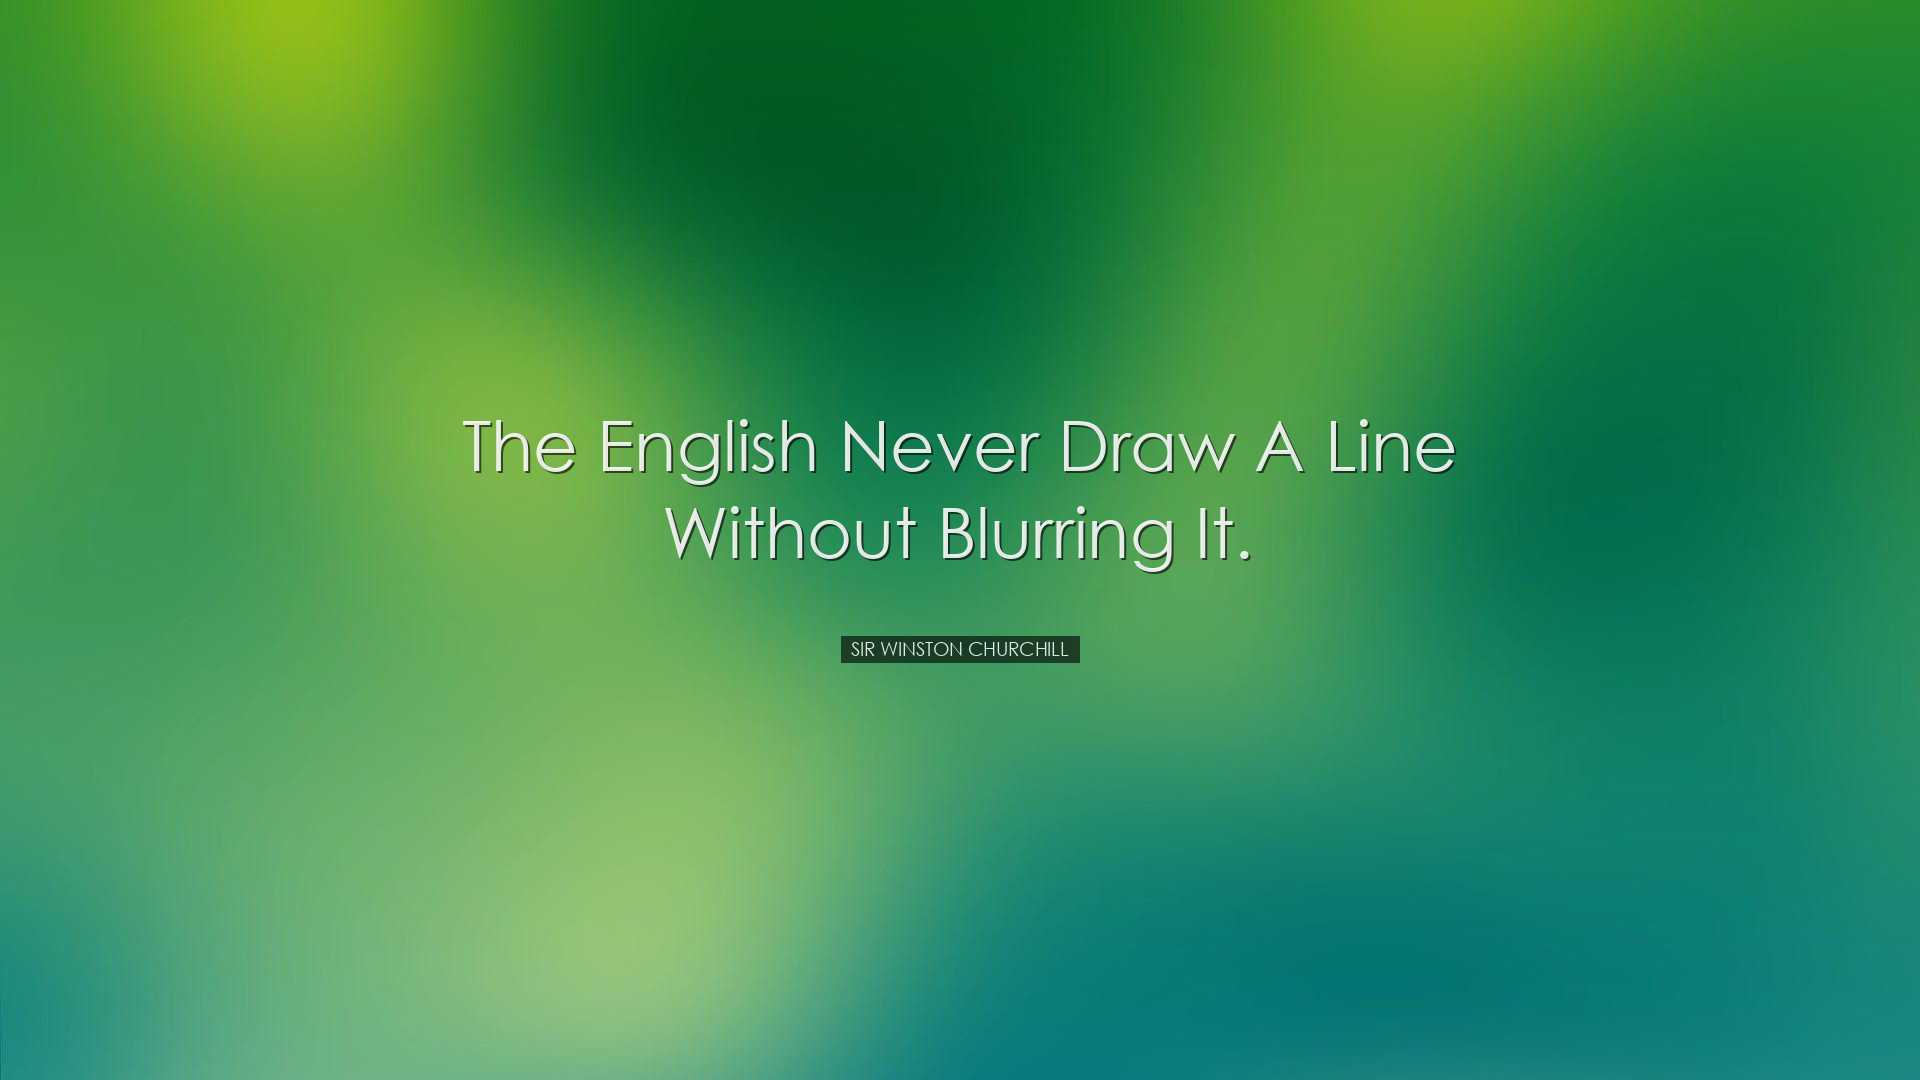 The English never draw a line without blurring it. - Sir Winston C